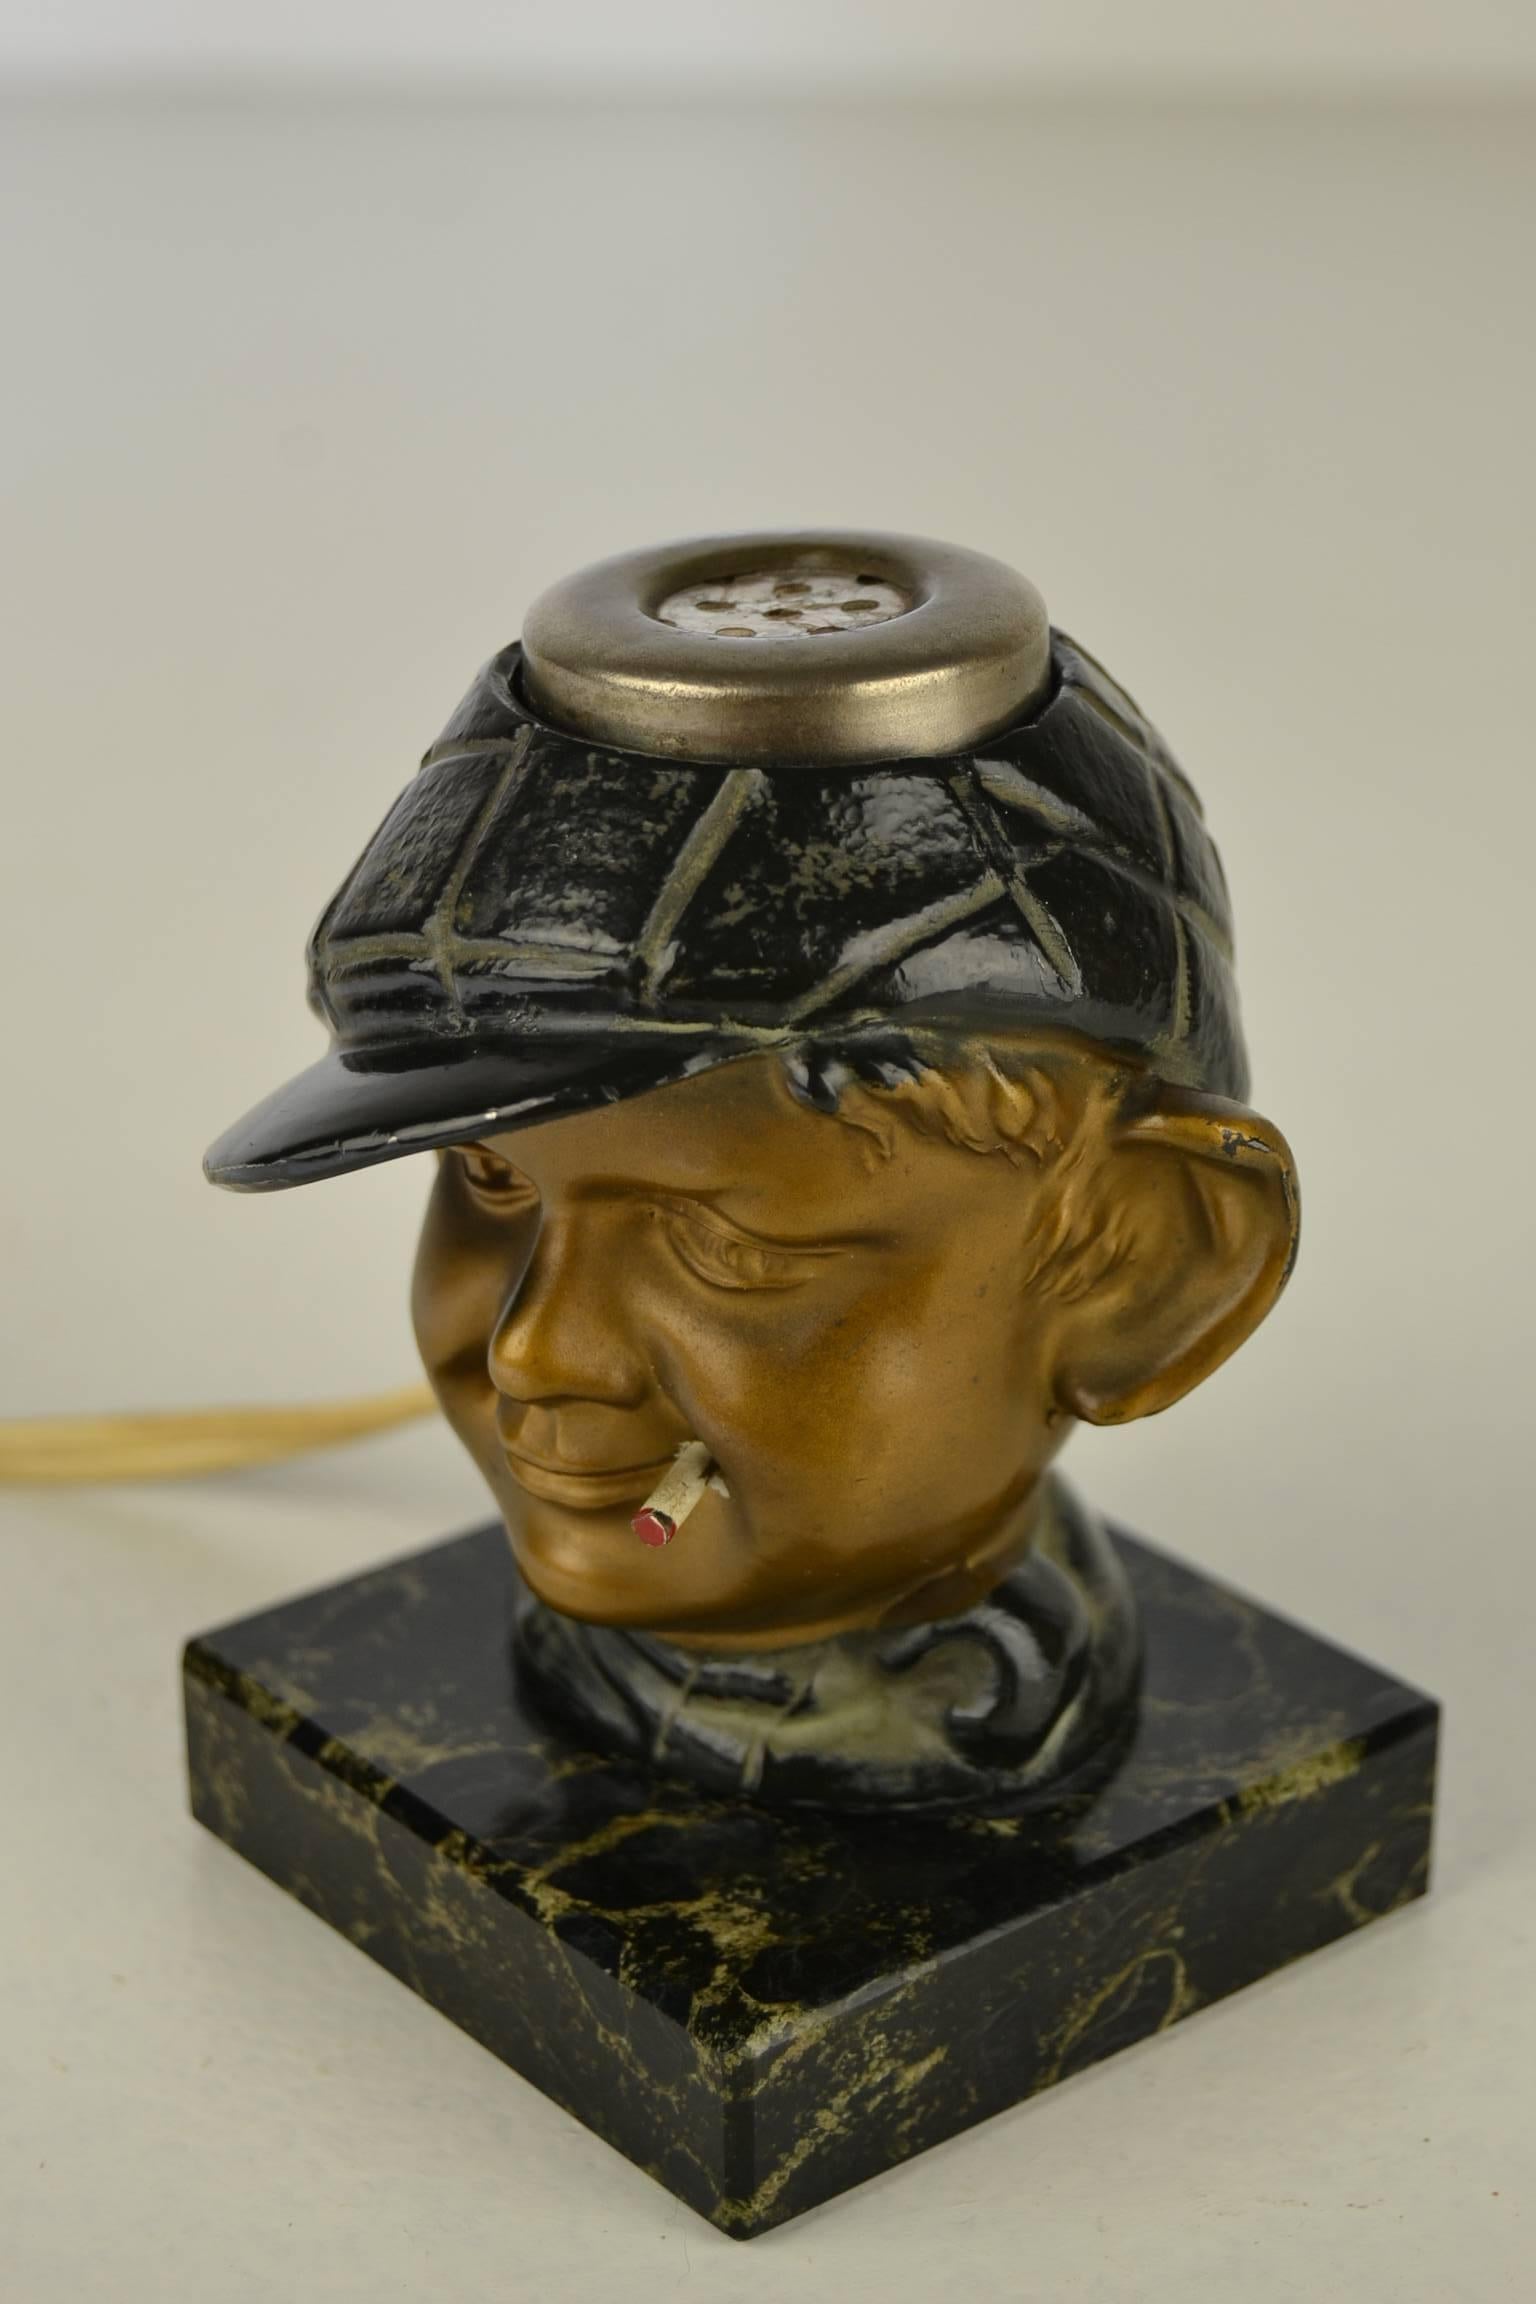 Antique electric cigar lighter.
Cold painted bronze man with cigarette in his mouth, mounted on marble base.
The heating system is on the hat ( 110 V ) , but doesn't work anymore.
this vintage figural cigar lighter is a collectible item - desk